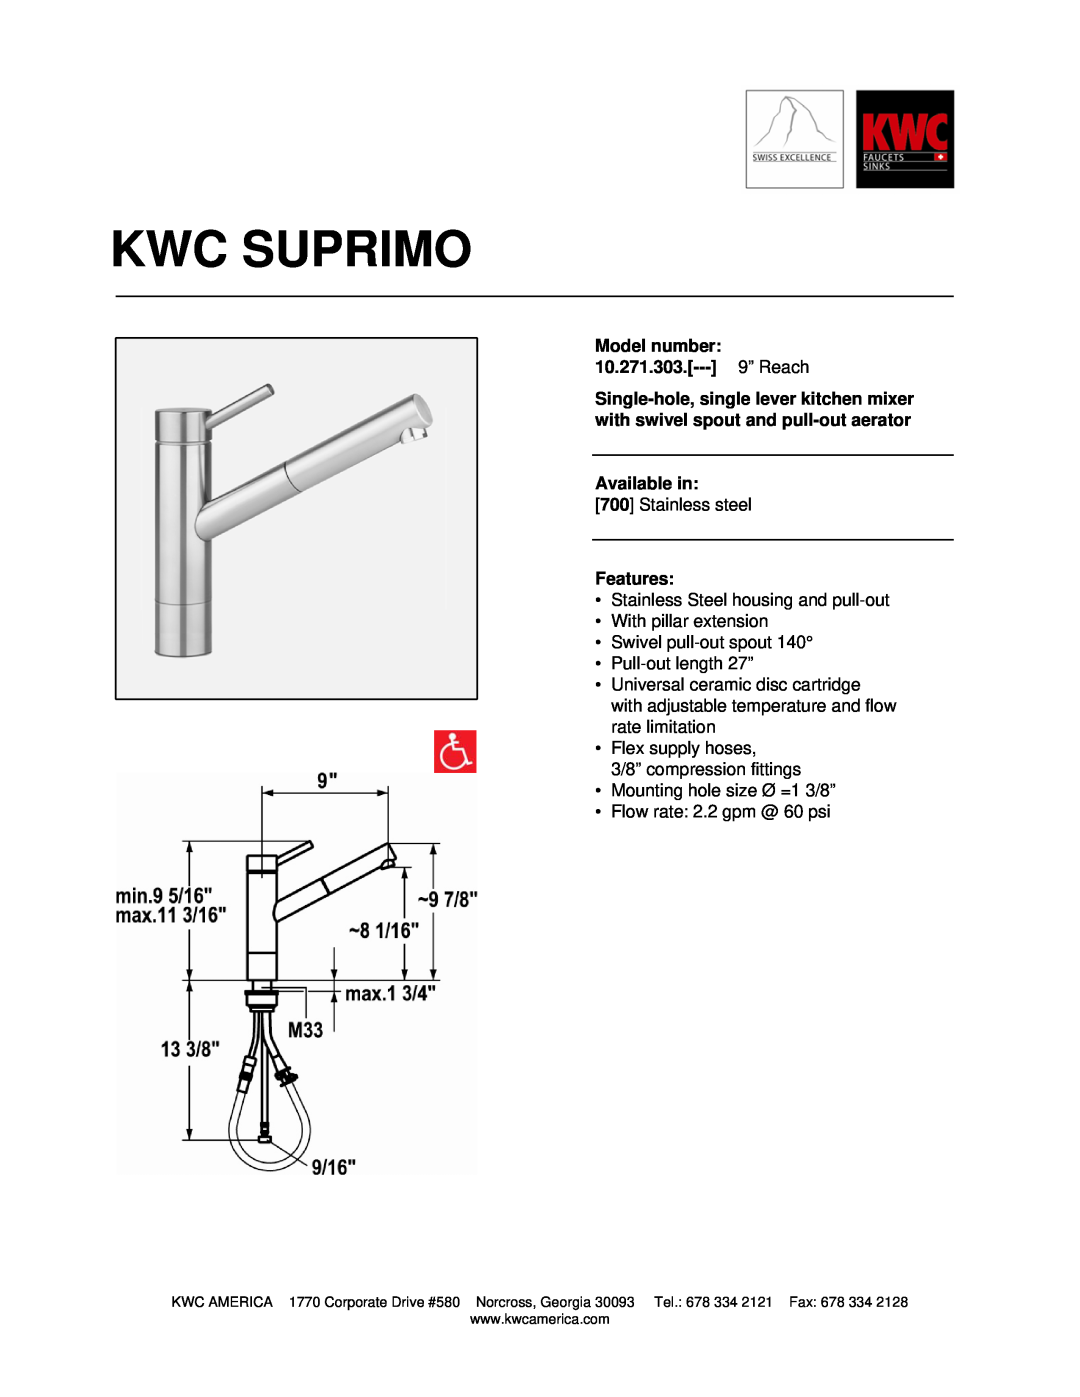 KWC manual Kwc Suprimo, Model number 10.271.303.--- 9” Reach, Available in, Features 